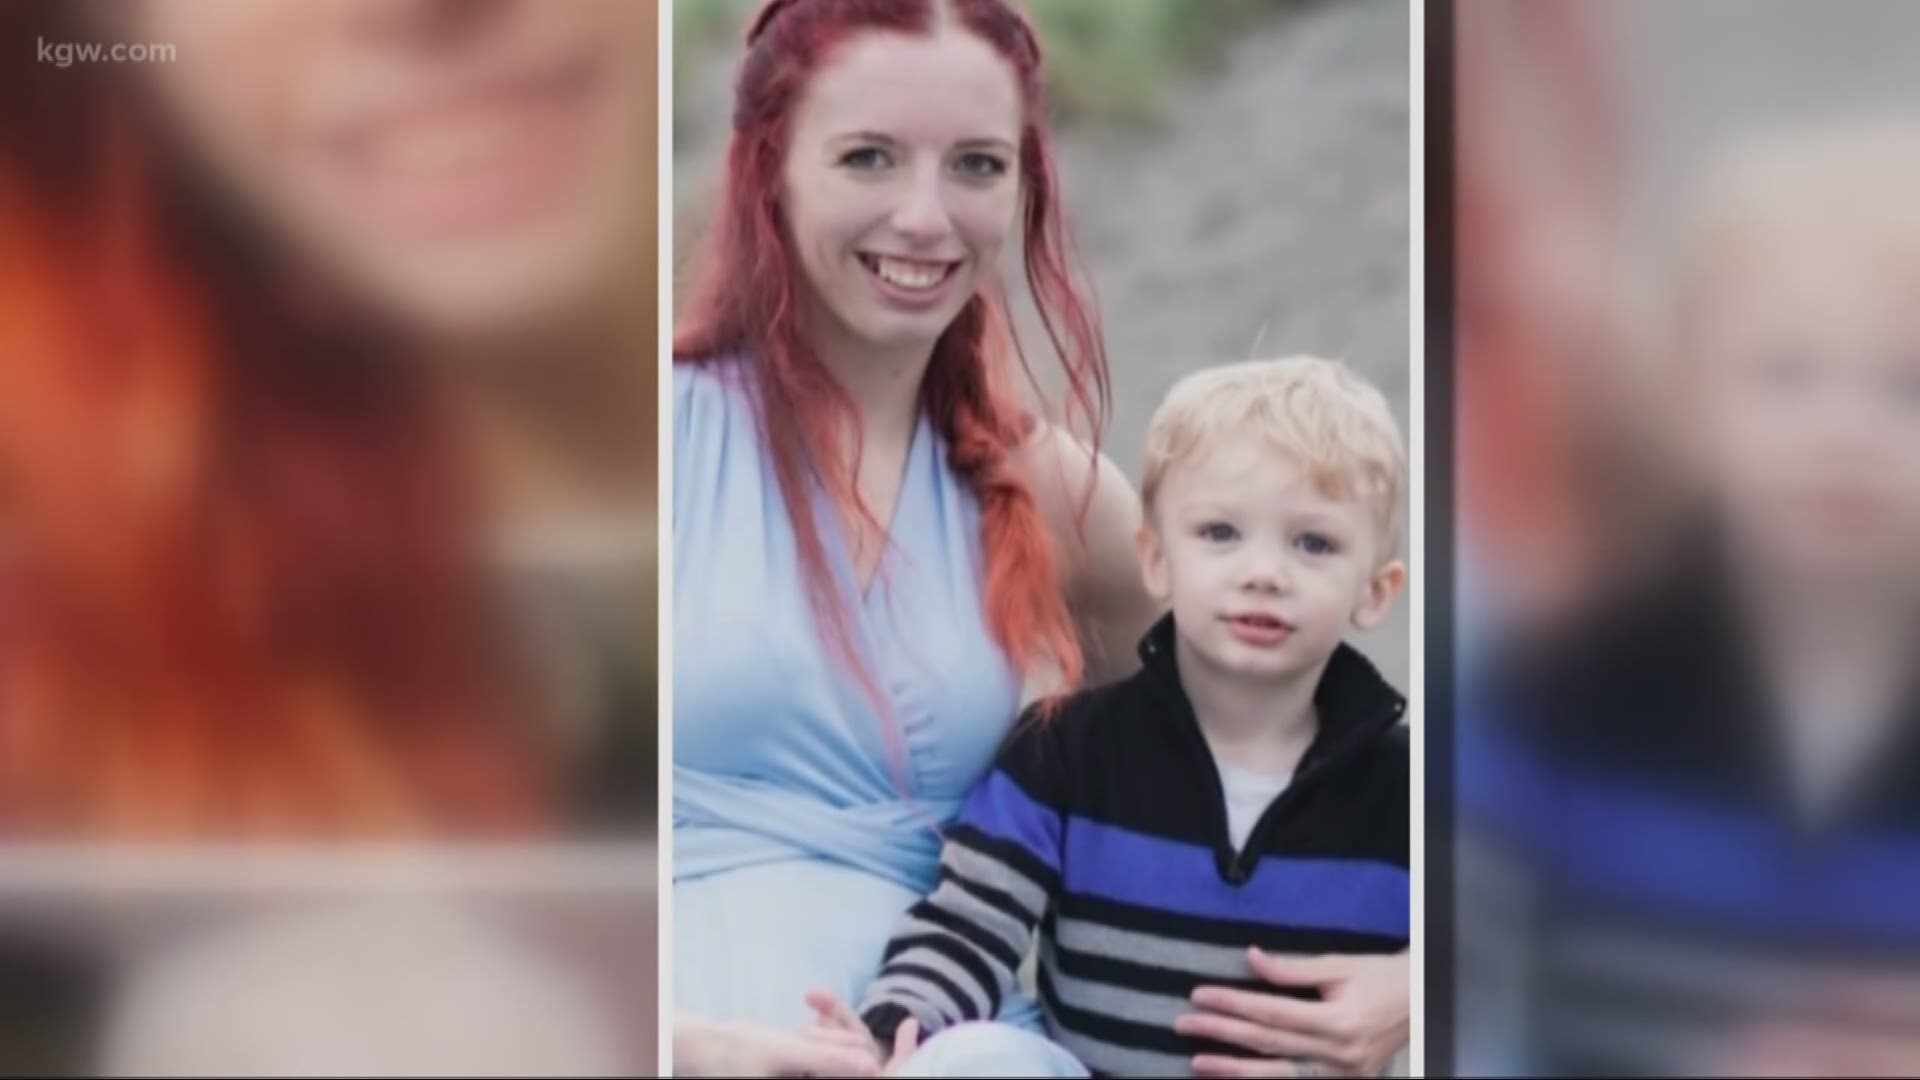 Karissa Alyn Fretwell, 25, and her son, William "Billy" Fretwell, were last seen on May 13. Michael Wolfe, the boy's father, has been charged with two counts of aggravated murder and kidnapping.